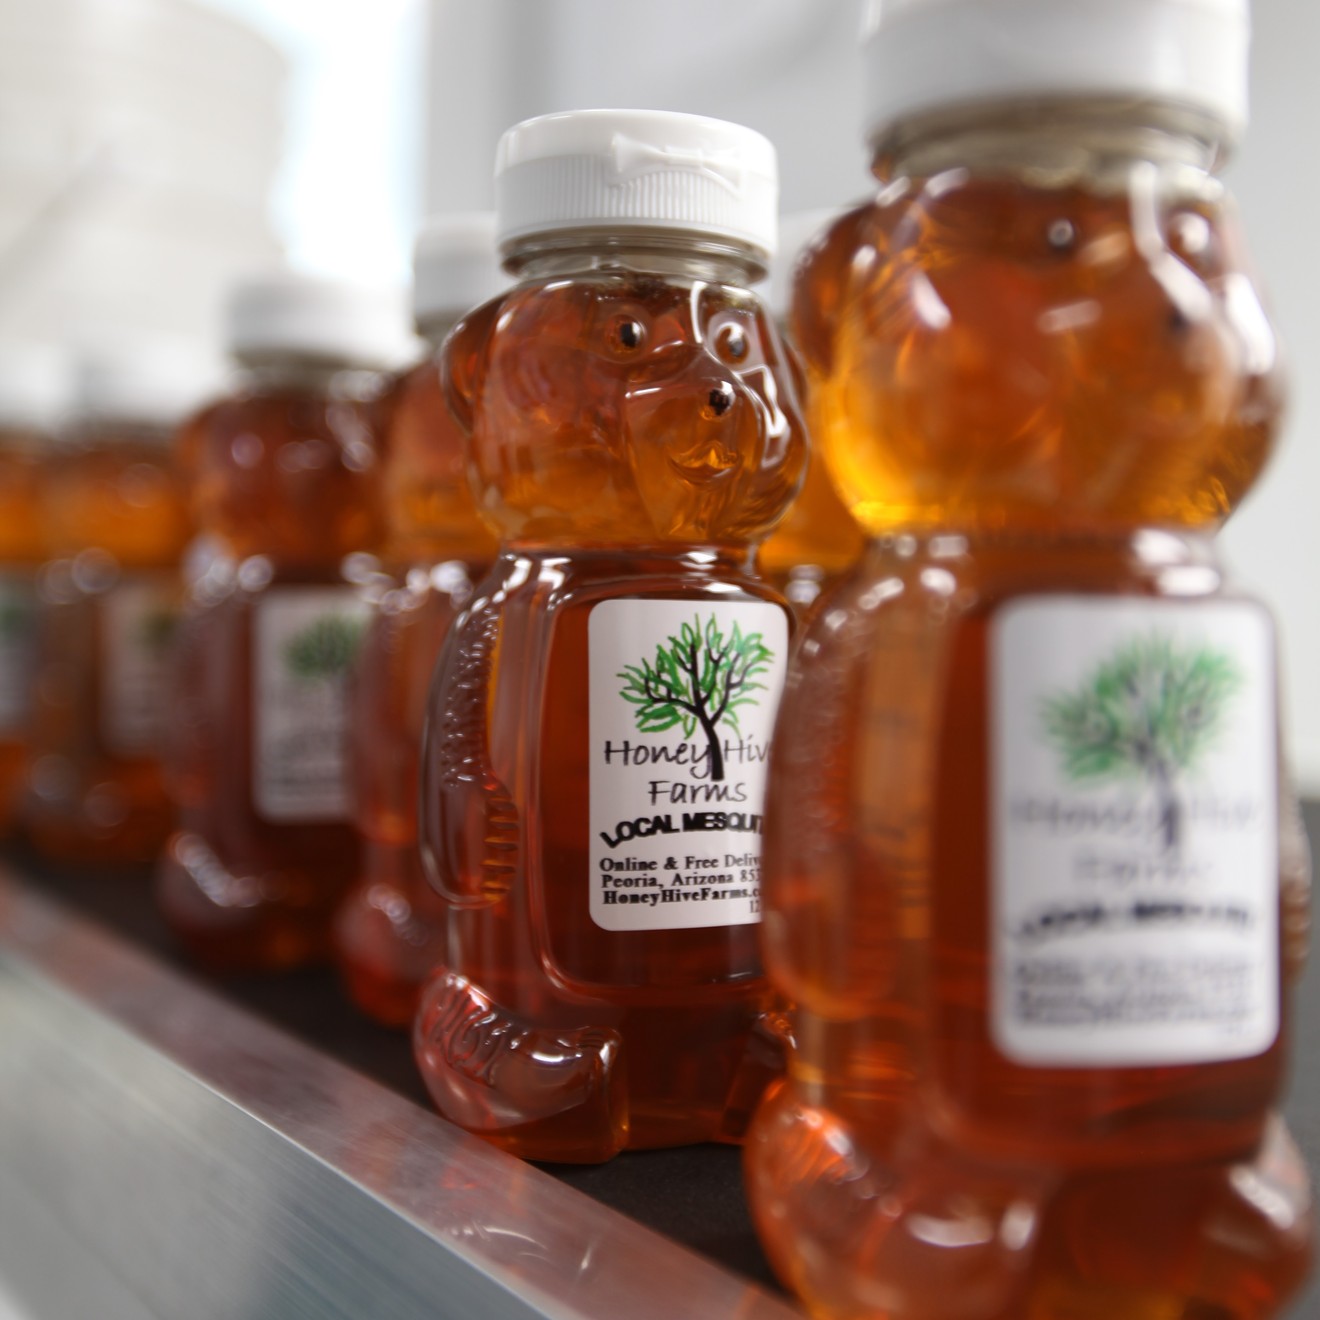 Honey Hive Farms sells a selection of different types of honey.